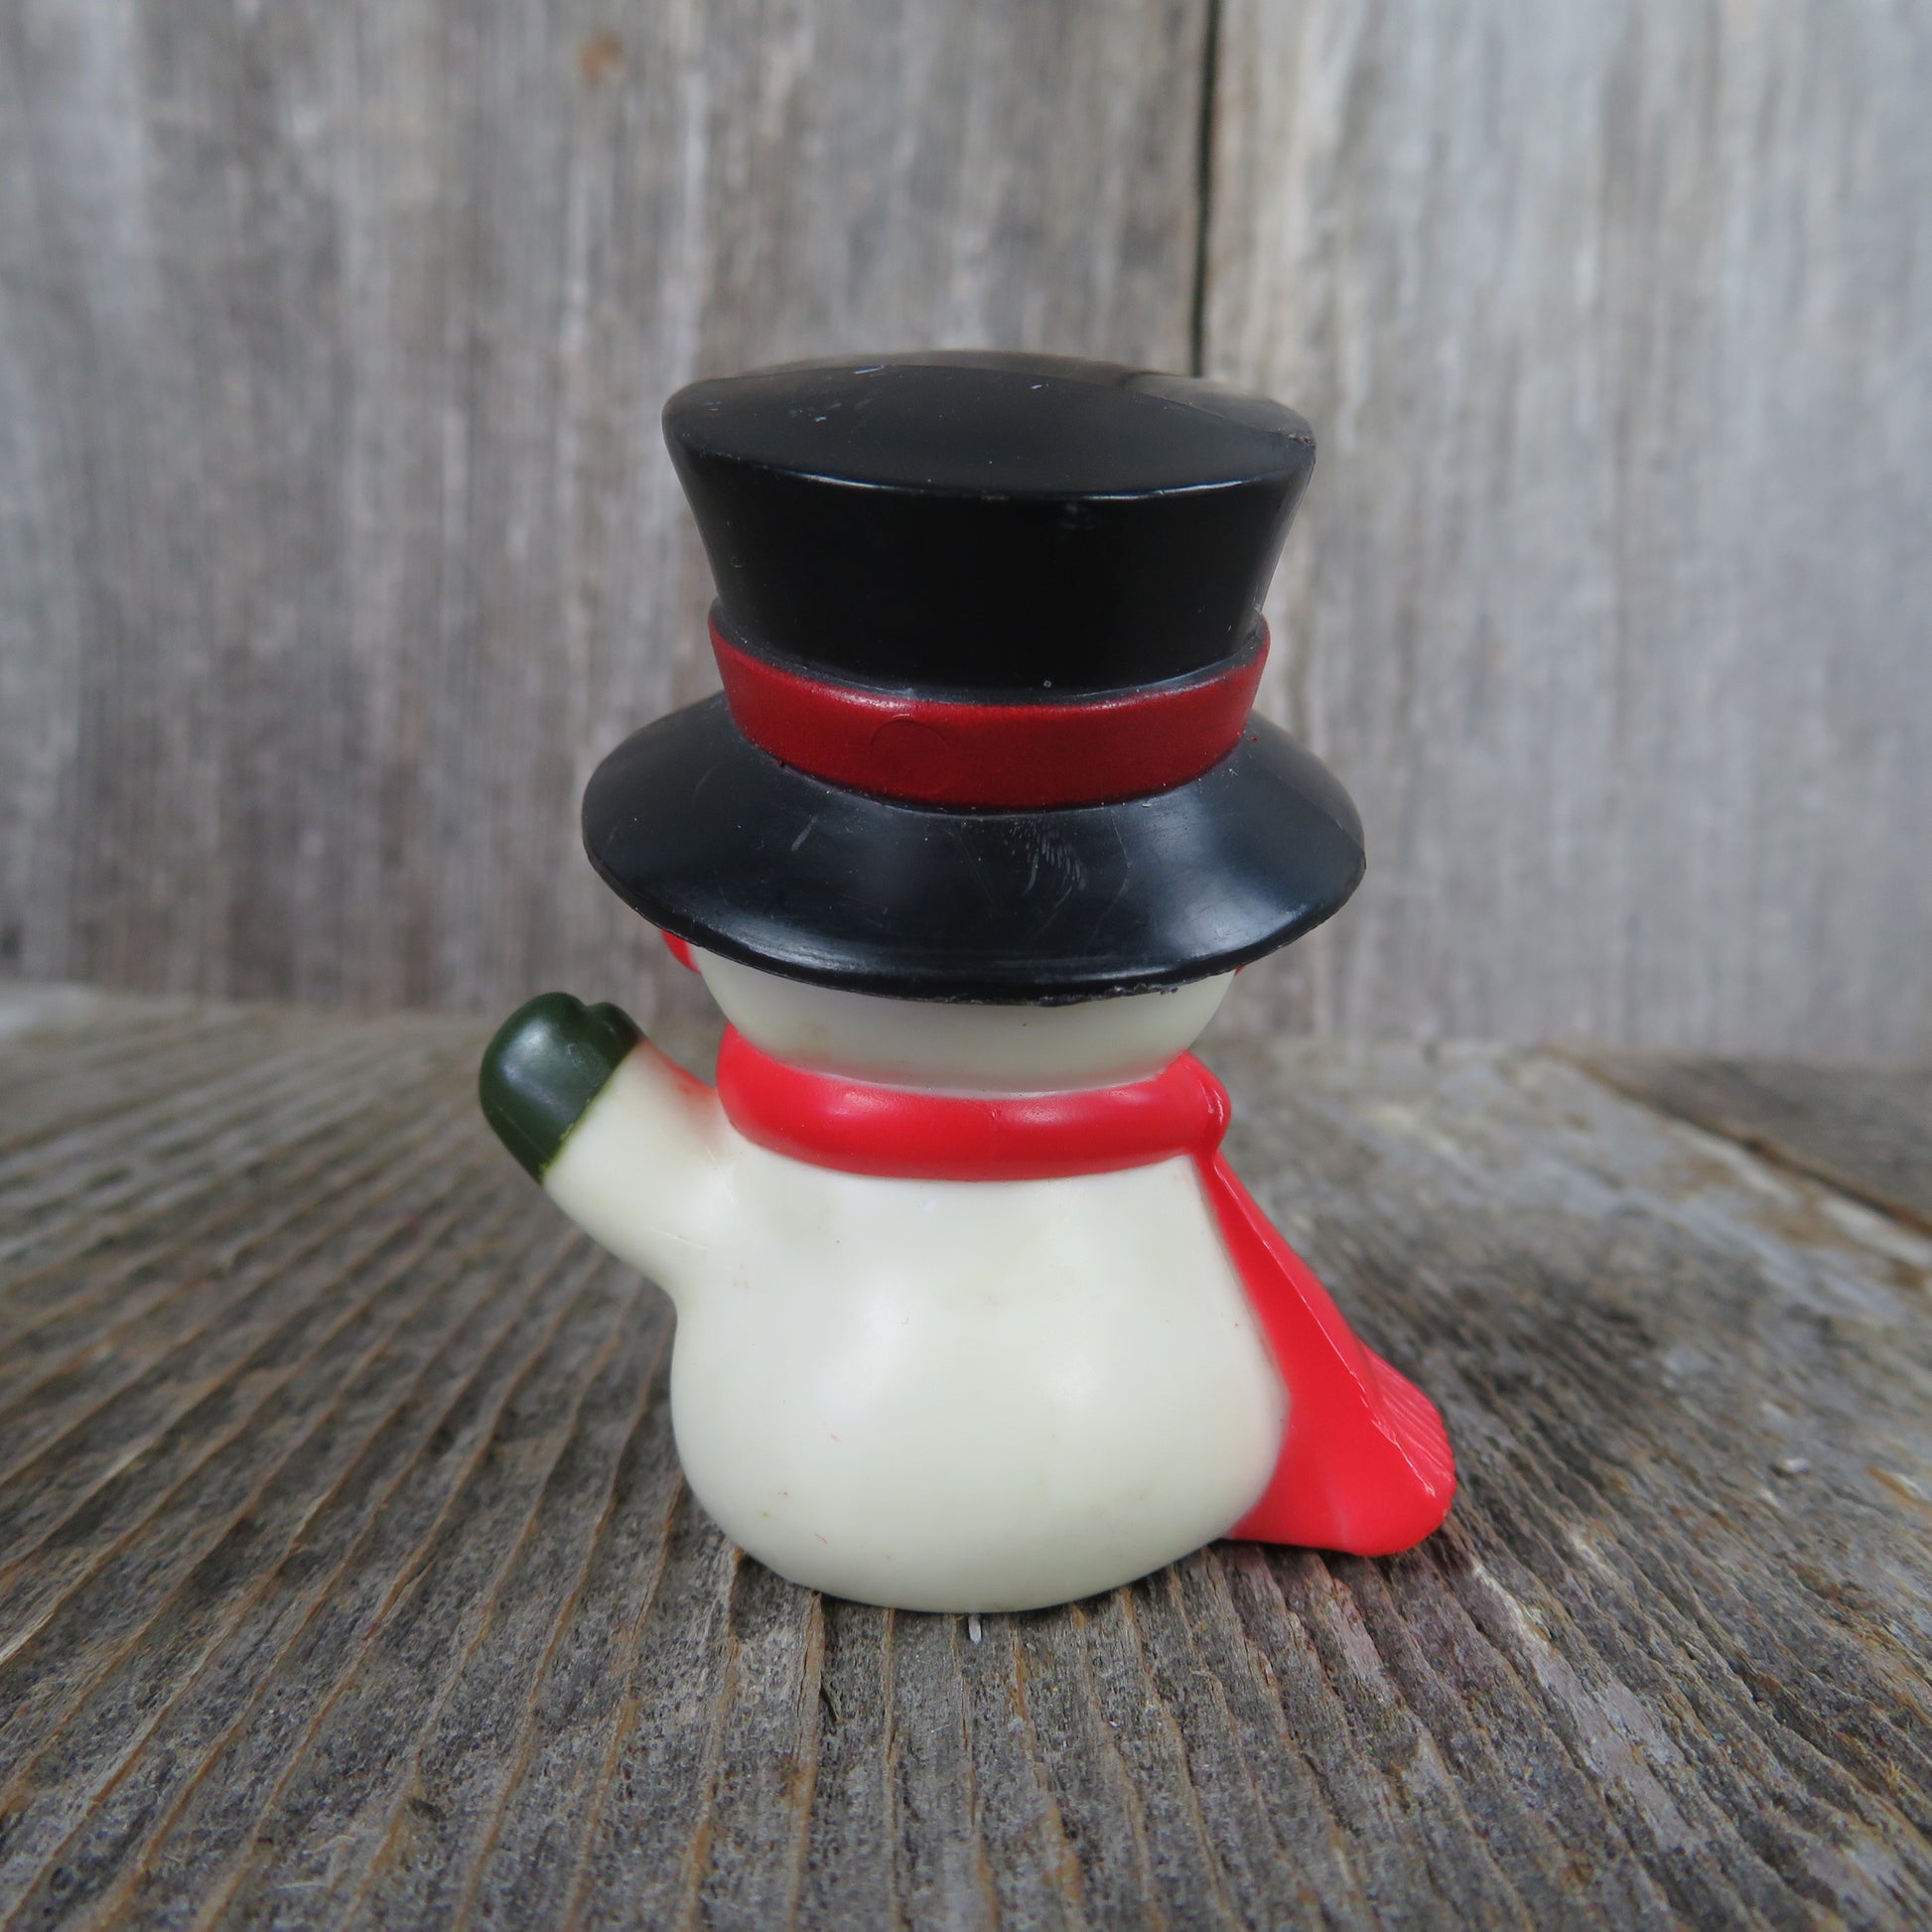 Vintage Snowman With Bird Figurine Plastic Top Hat Mittens Scarf Eyelashes Christmas Village - At Grandma's Table